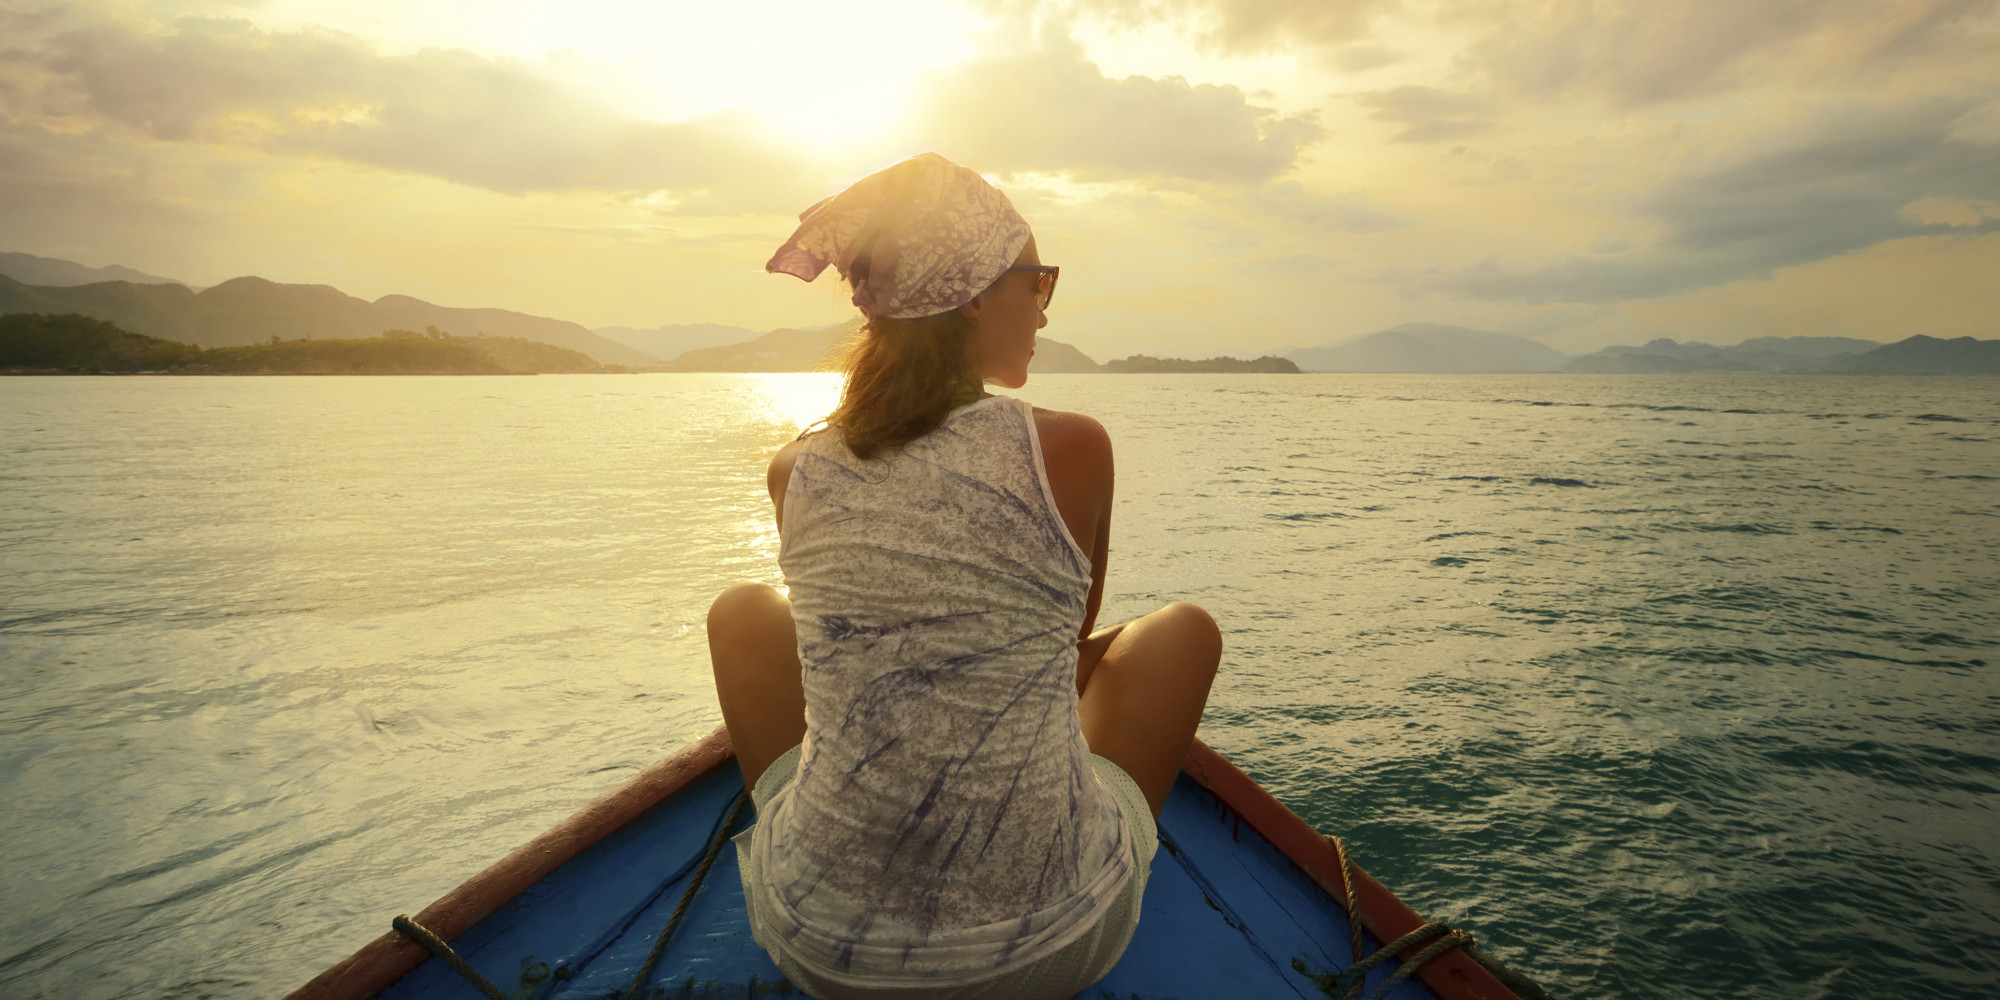 The Very Best Advice For Women Traveling Alone Huffpost